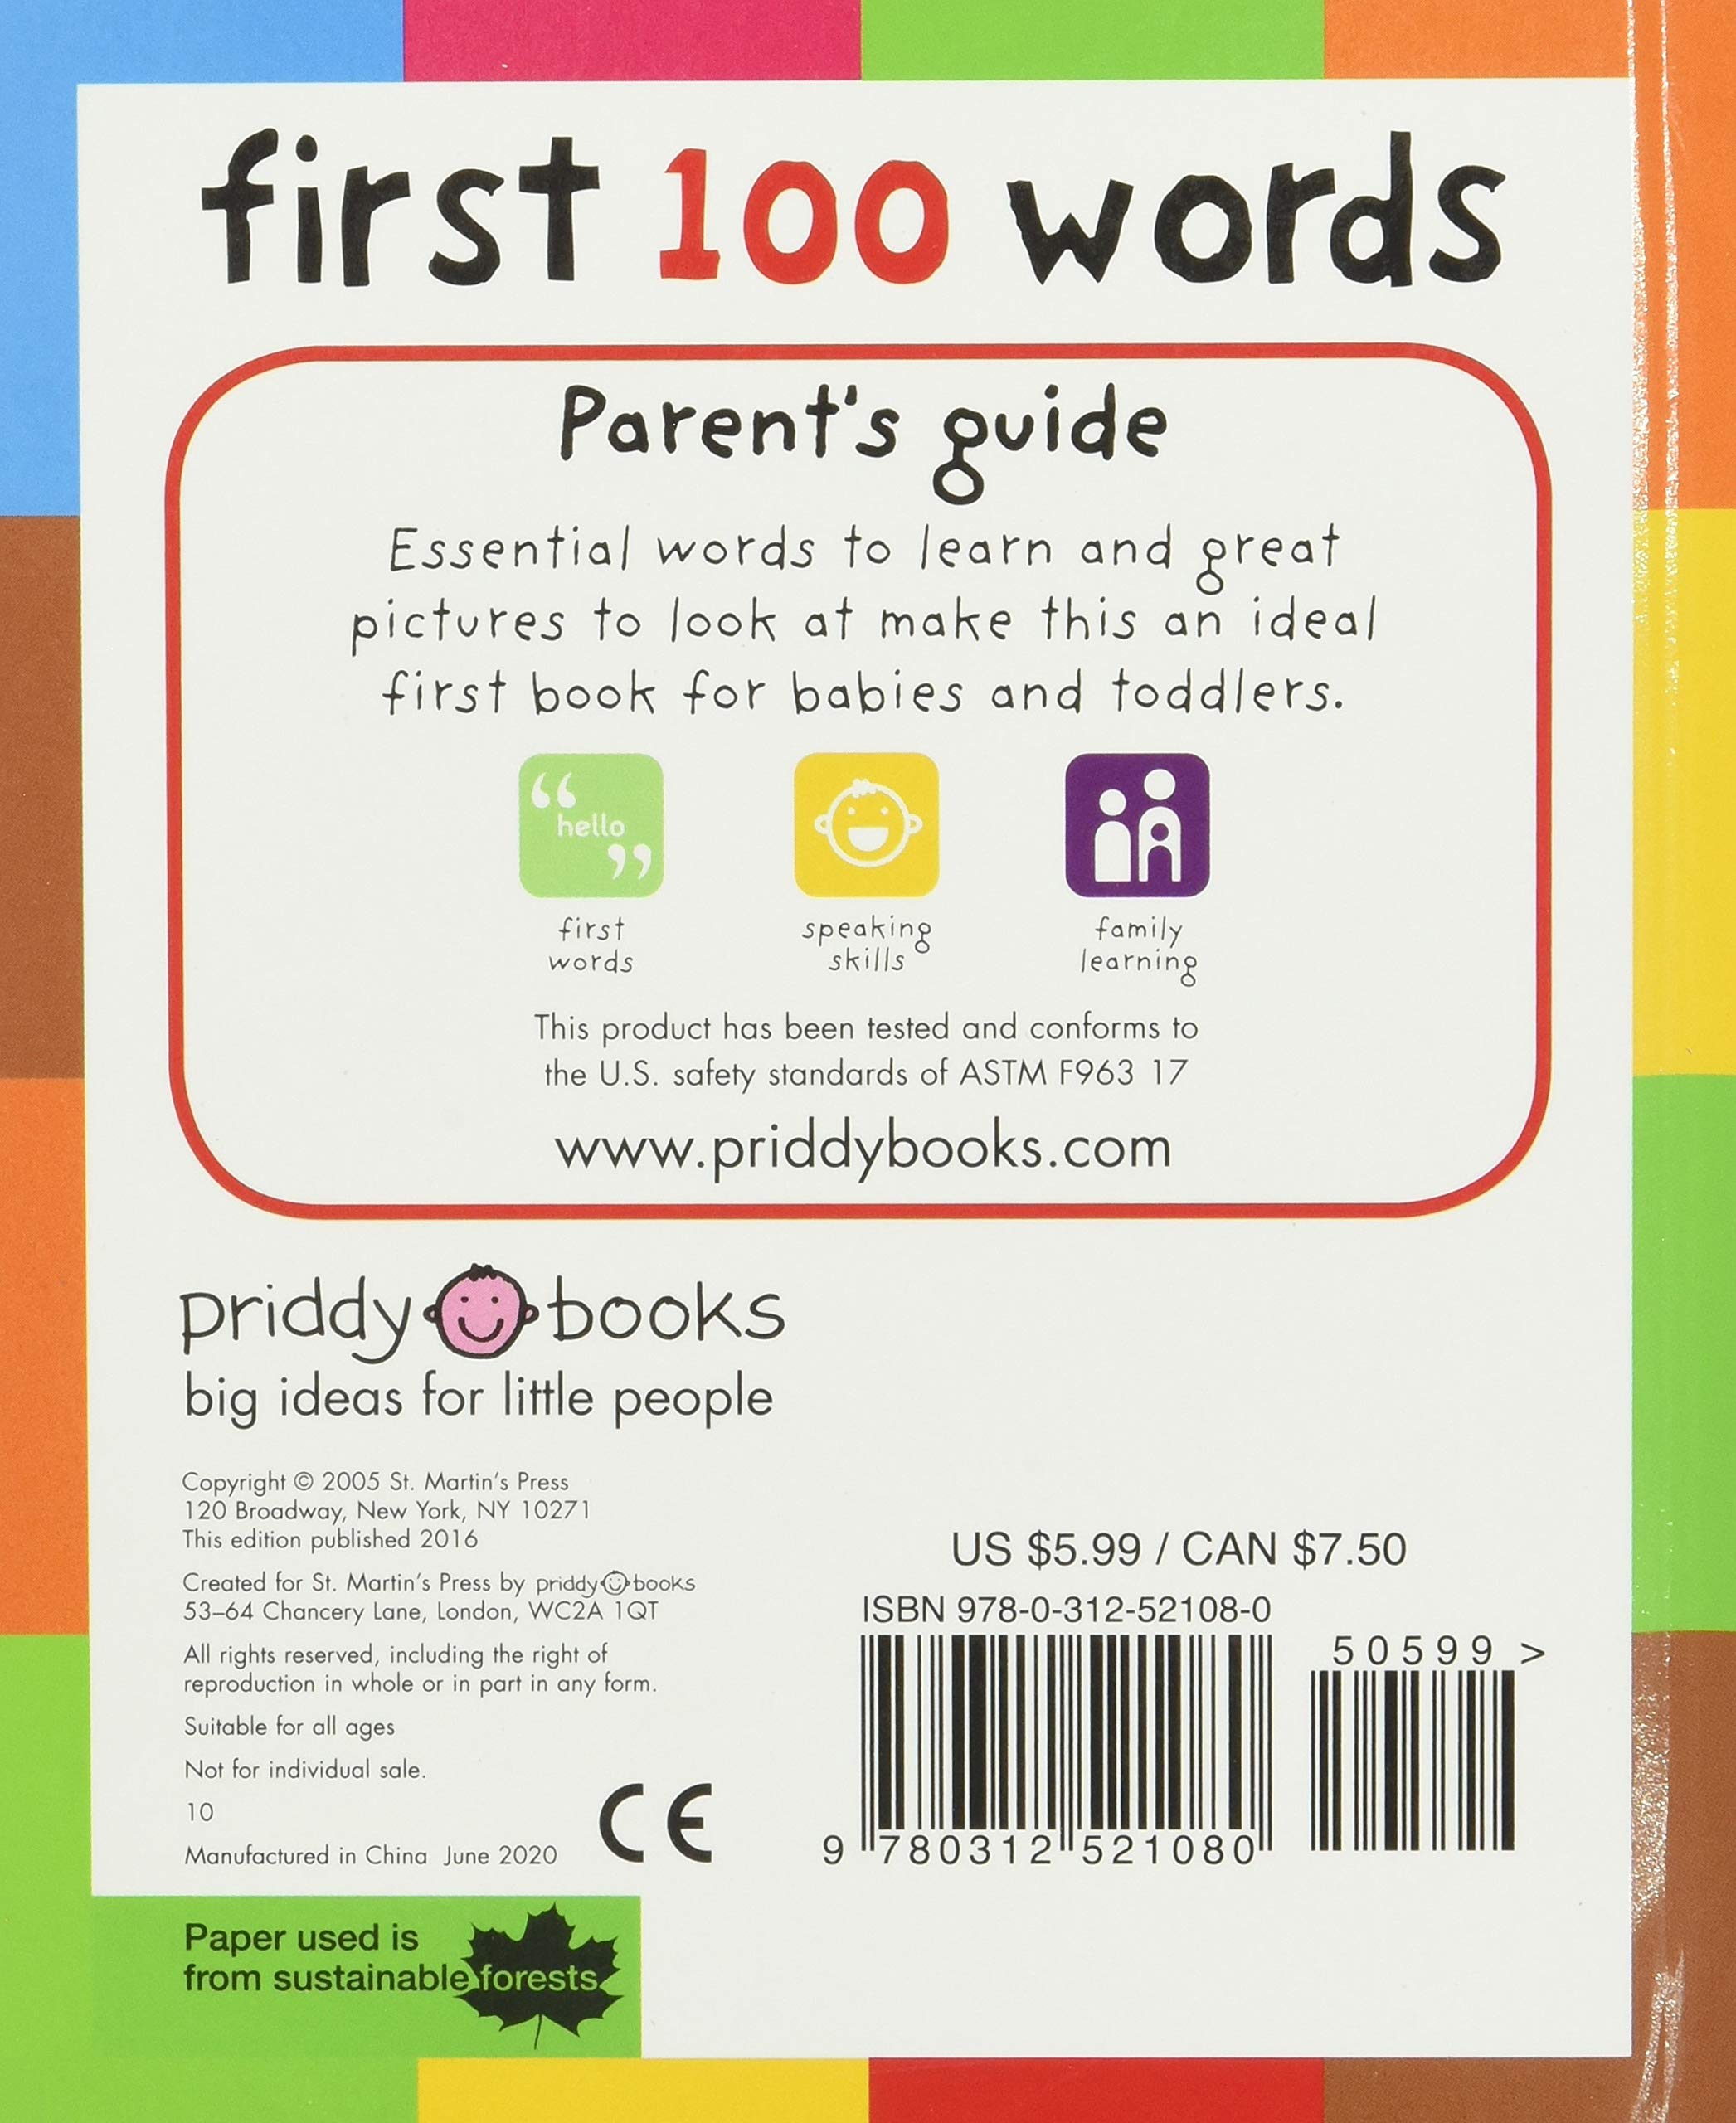 First 100 Board Book Box Set (3 books): First 100 Words, Numbers Colors Shapes, and First 100 Animals